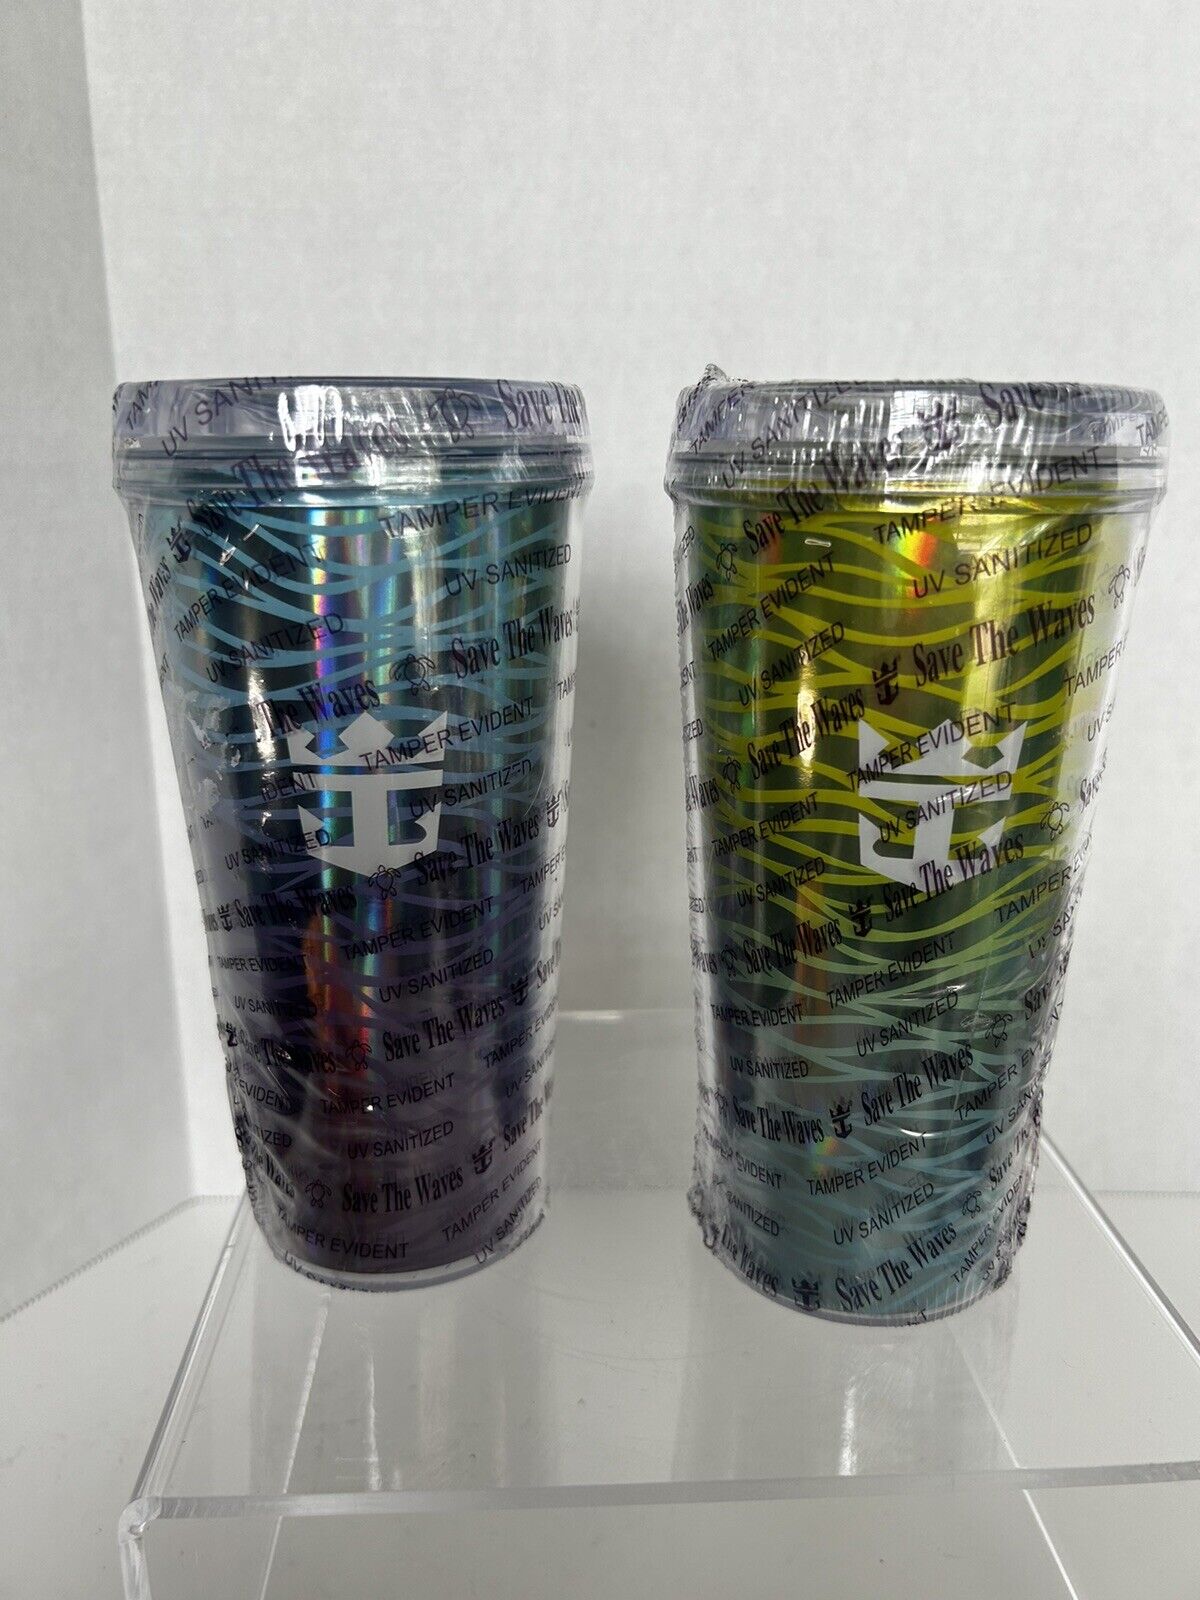 2 New & Sealed Royal Caribbean insulated Tumblers Coca Cola Drink Cups 2024